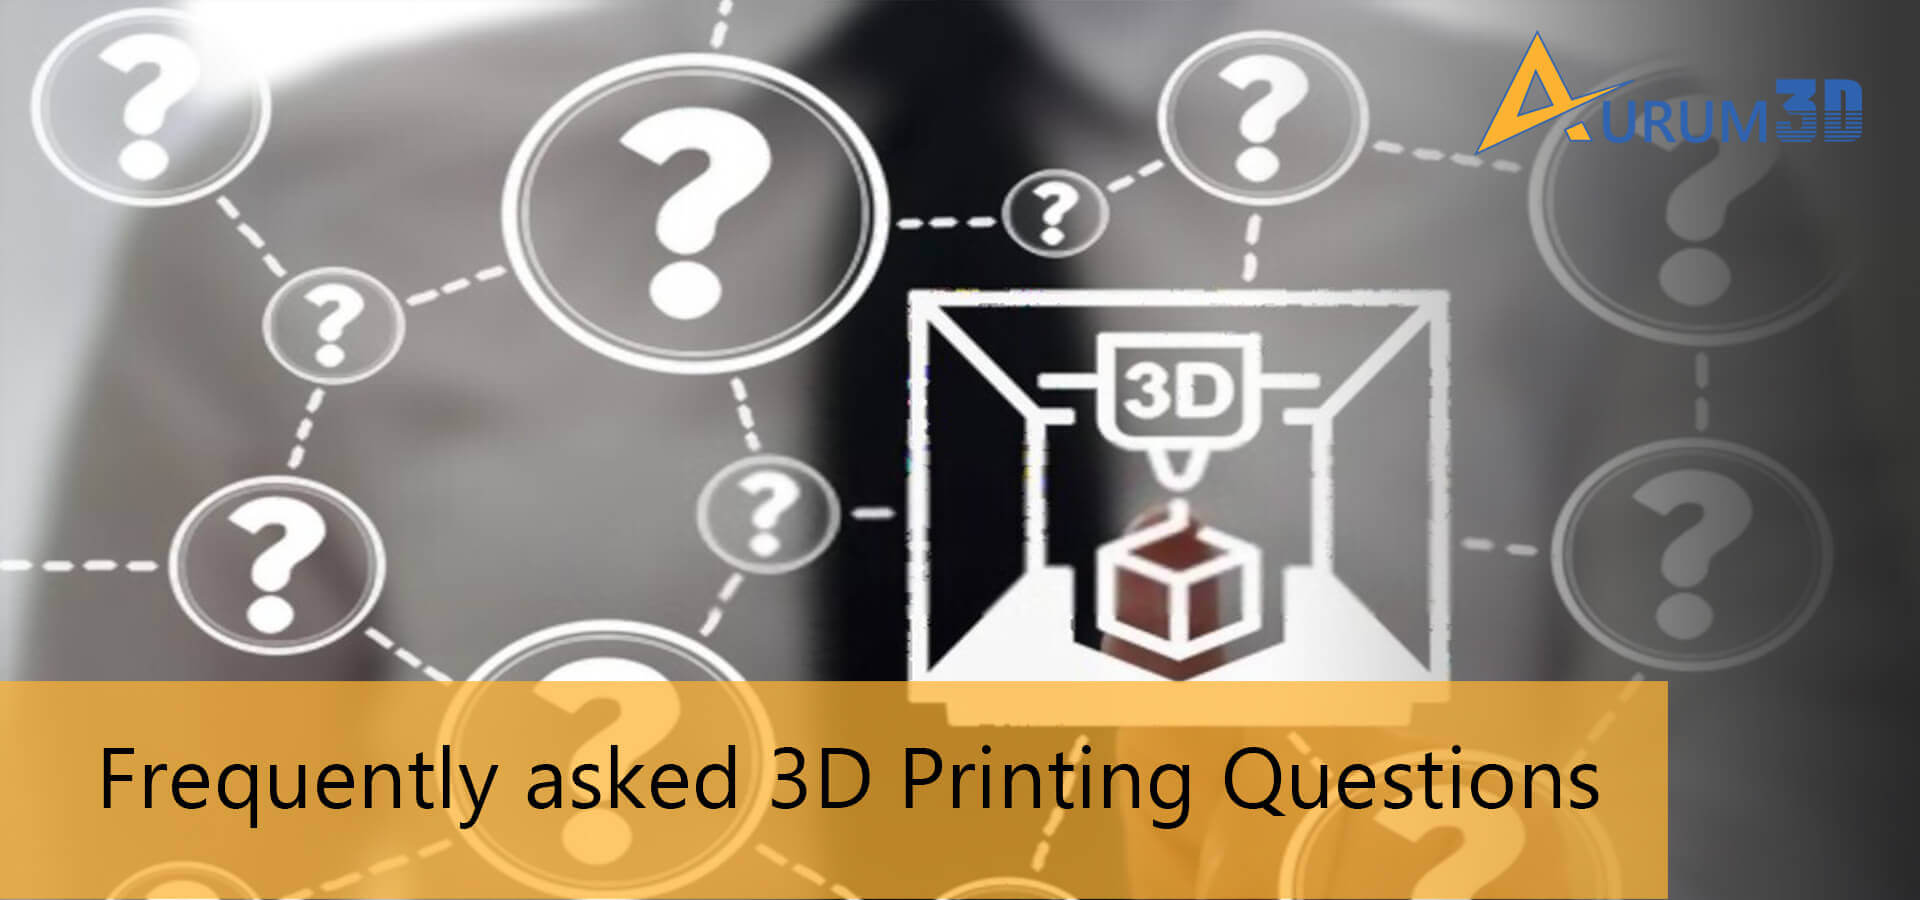 Frequently asked 3D Printing Questions